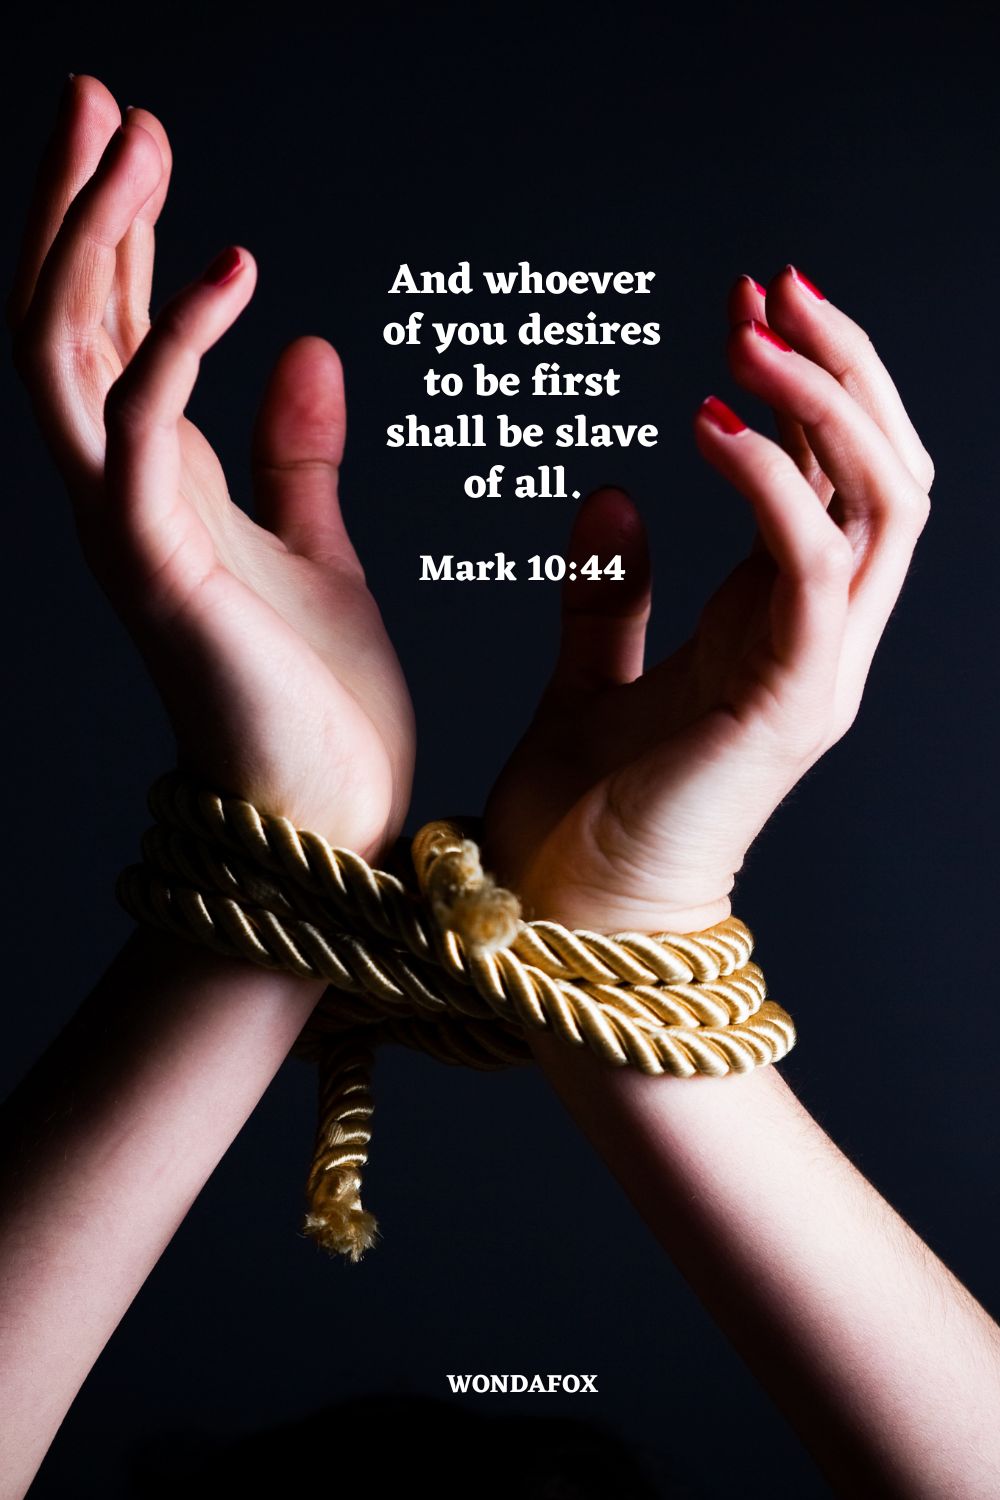 And whoever of you desires to be first shall be slave of all.
Mark 10:44